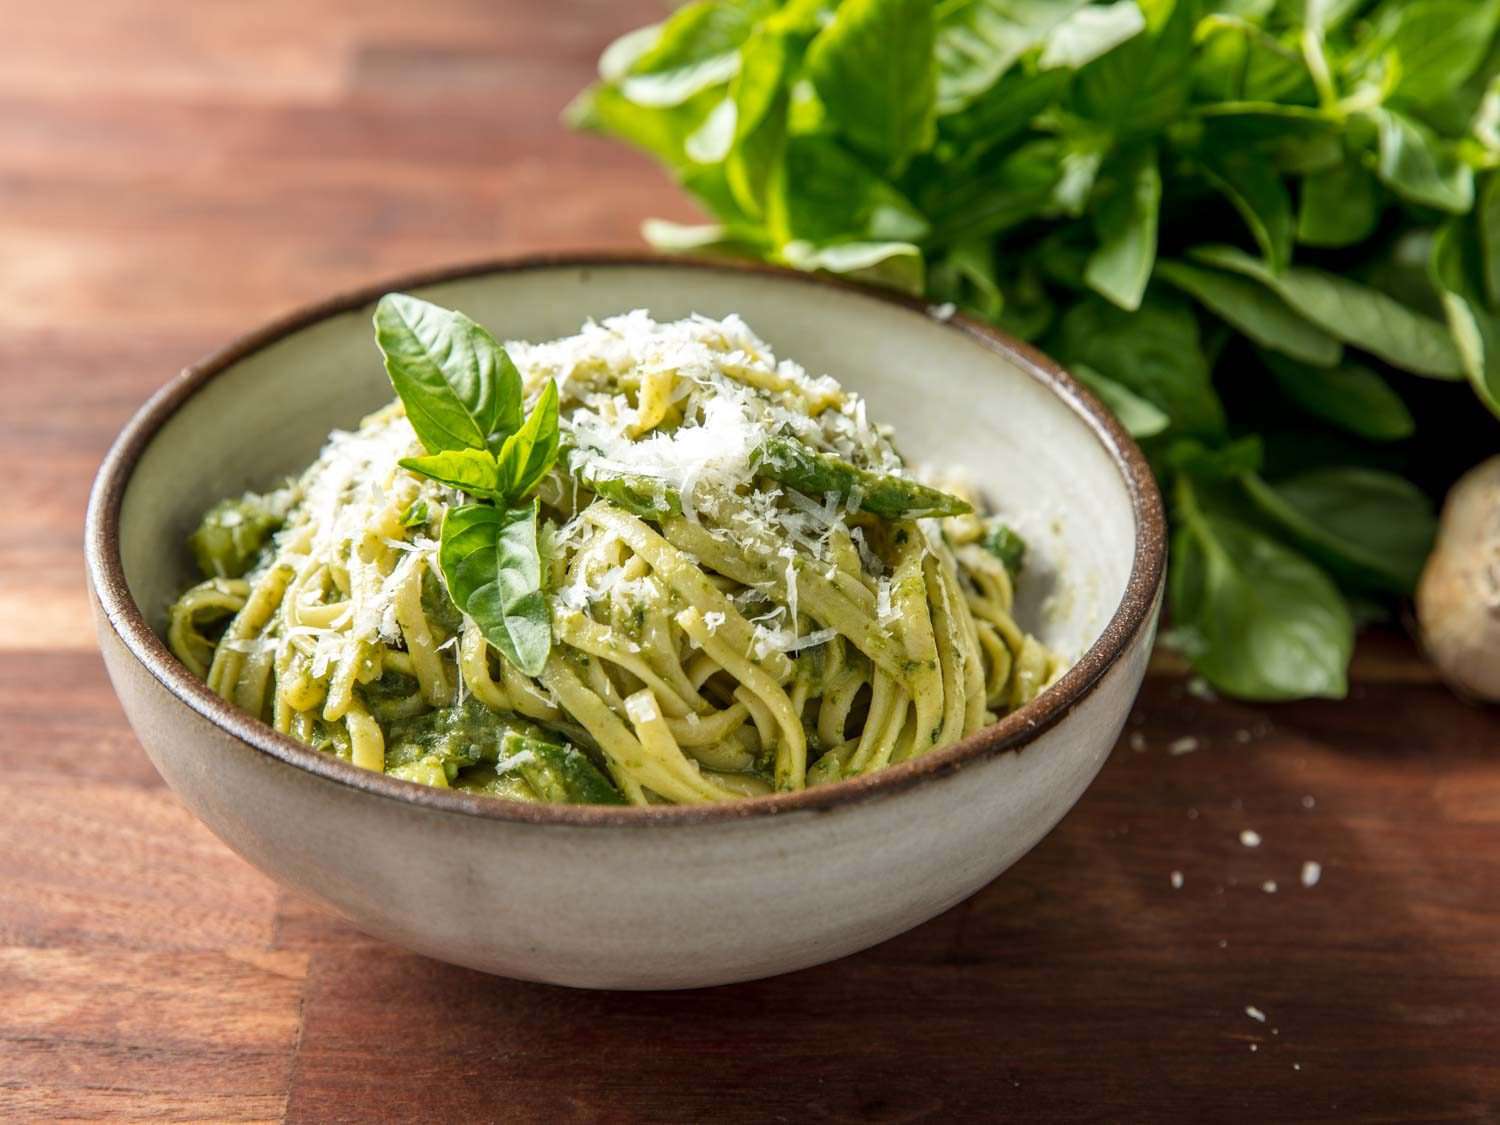 Pesto on linguine in a stone bowl, topped with cheese and basil leaves, with basil leaves in the background.